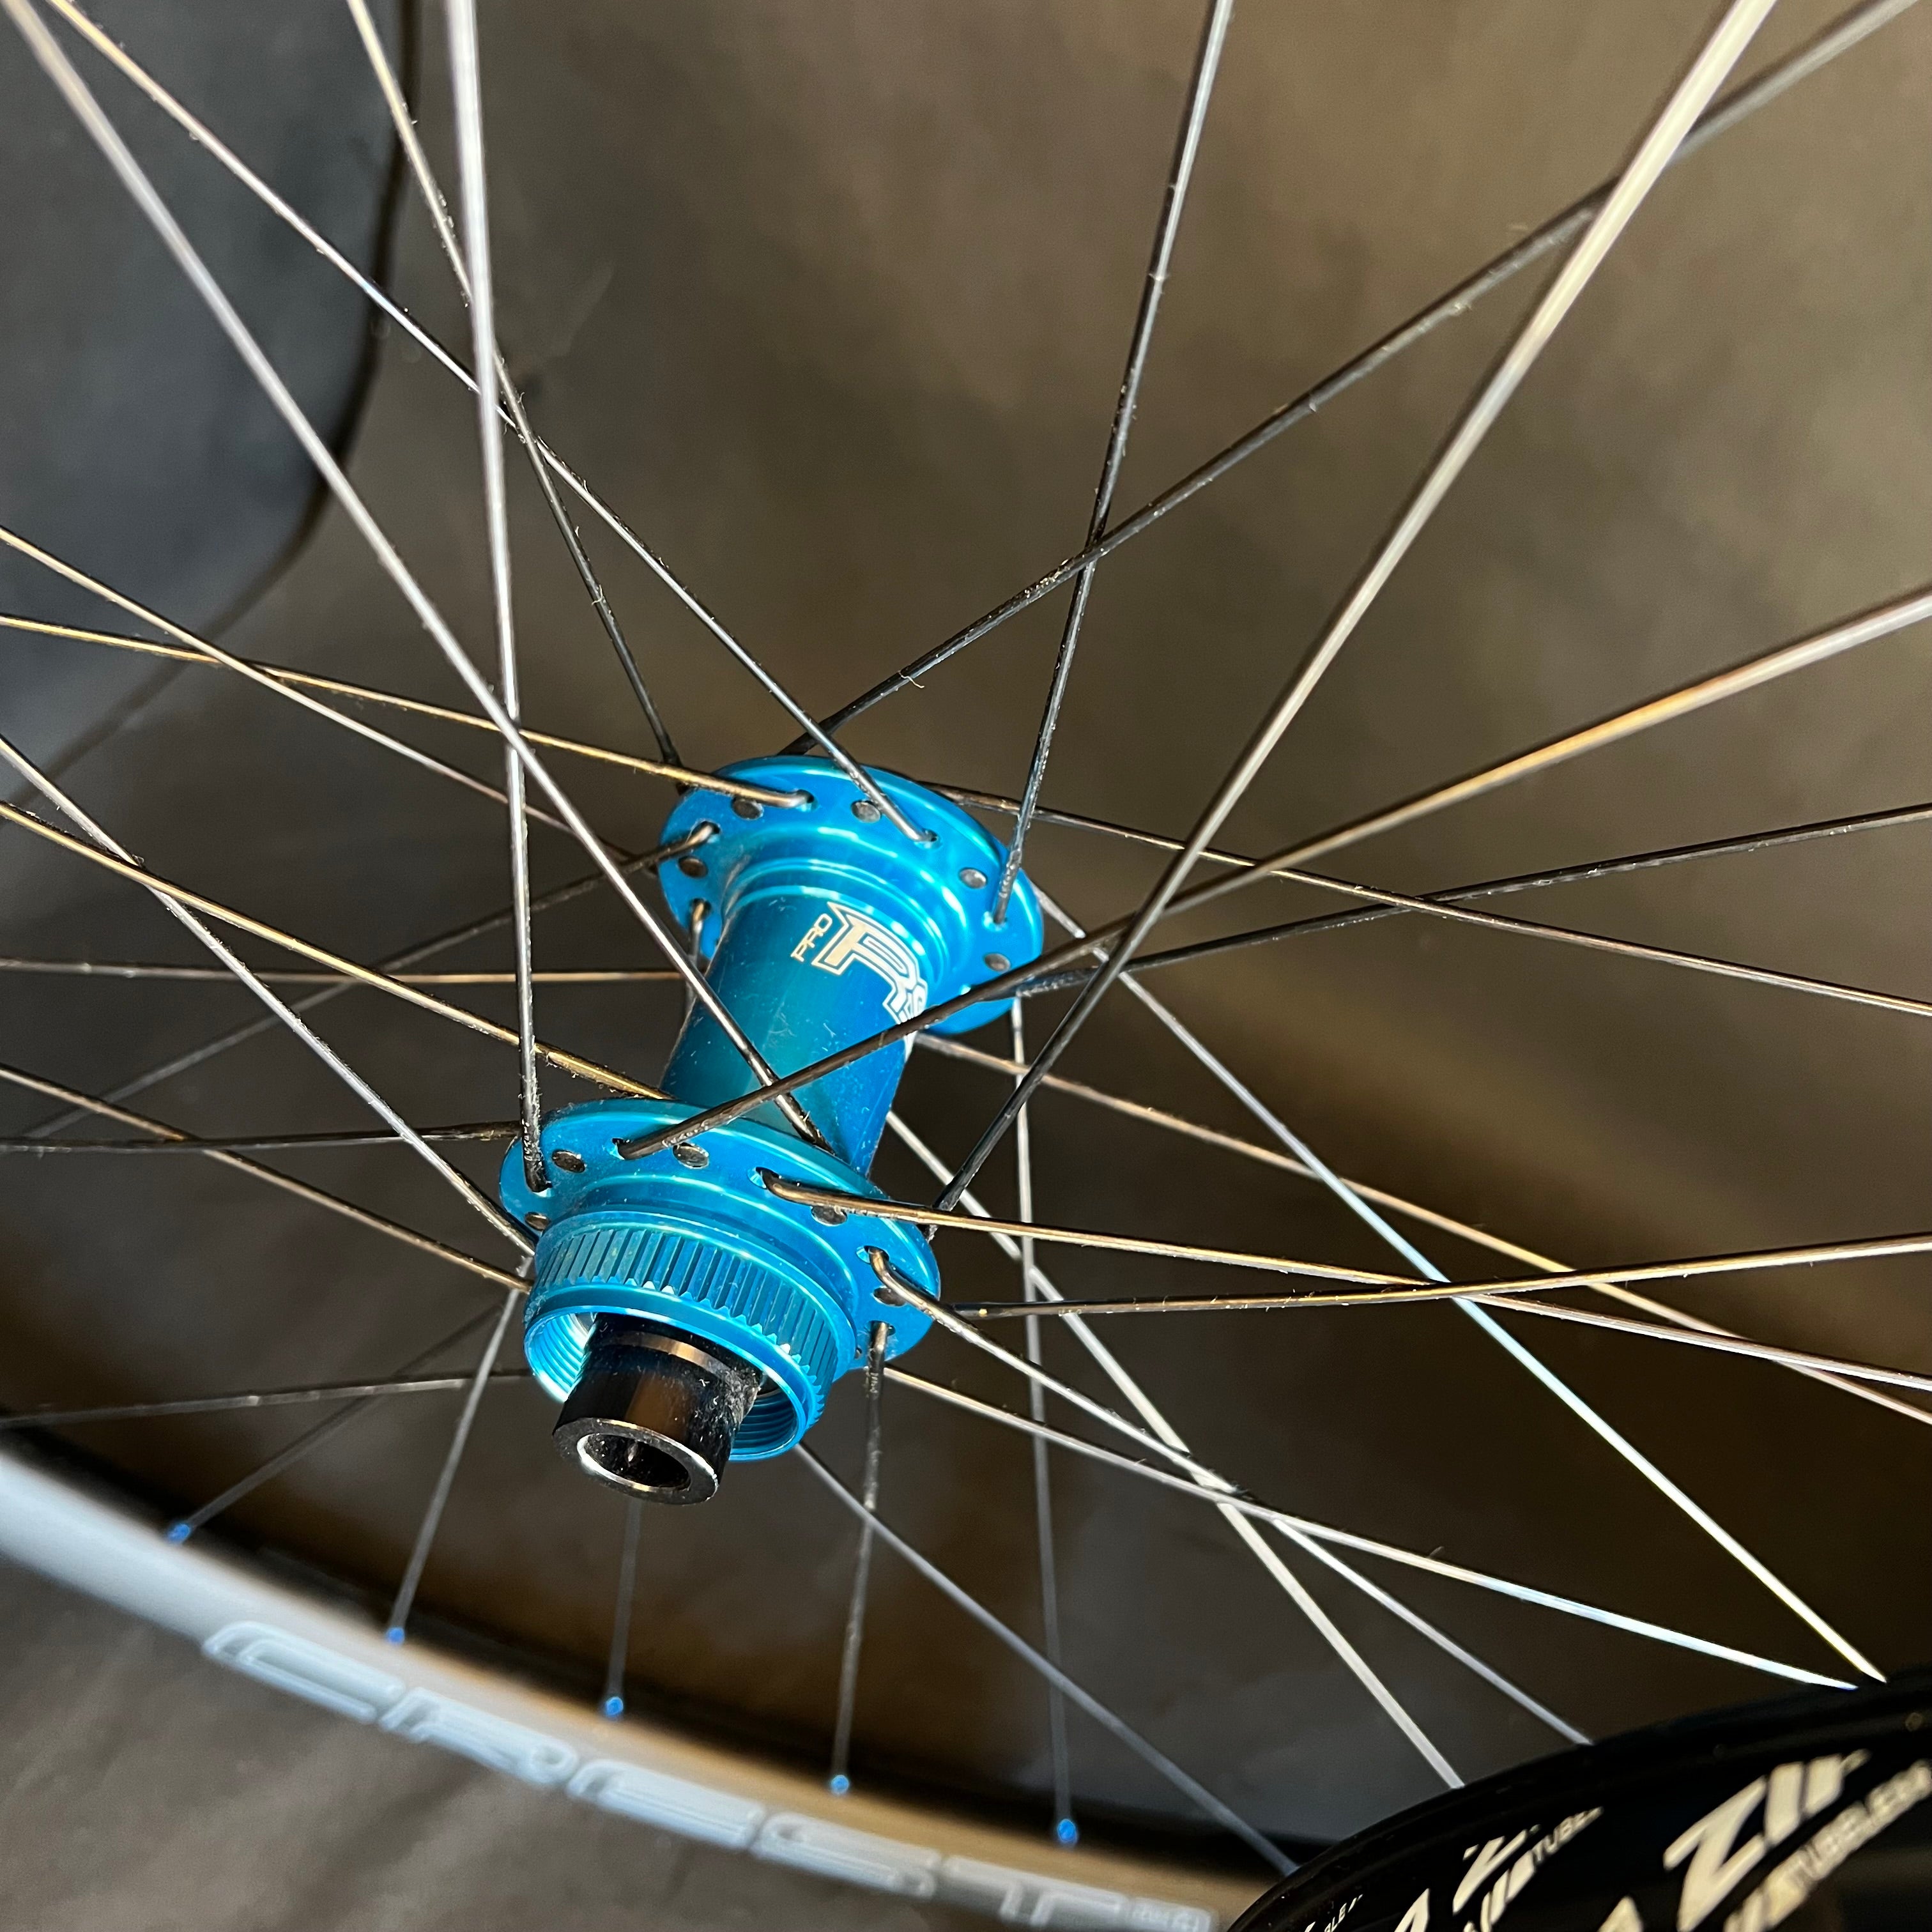 650b gravel wheels with hope RS4 hubs and stans crest rims